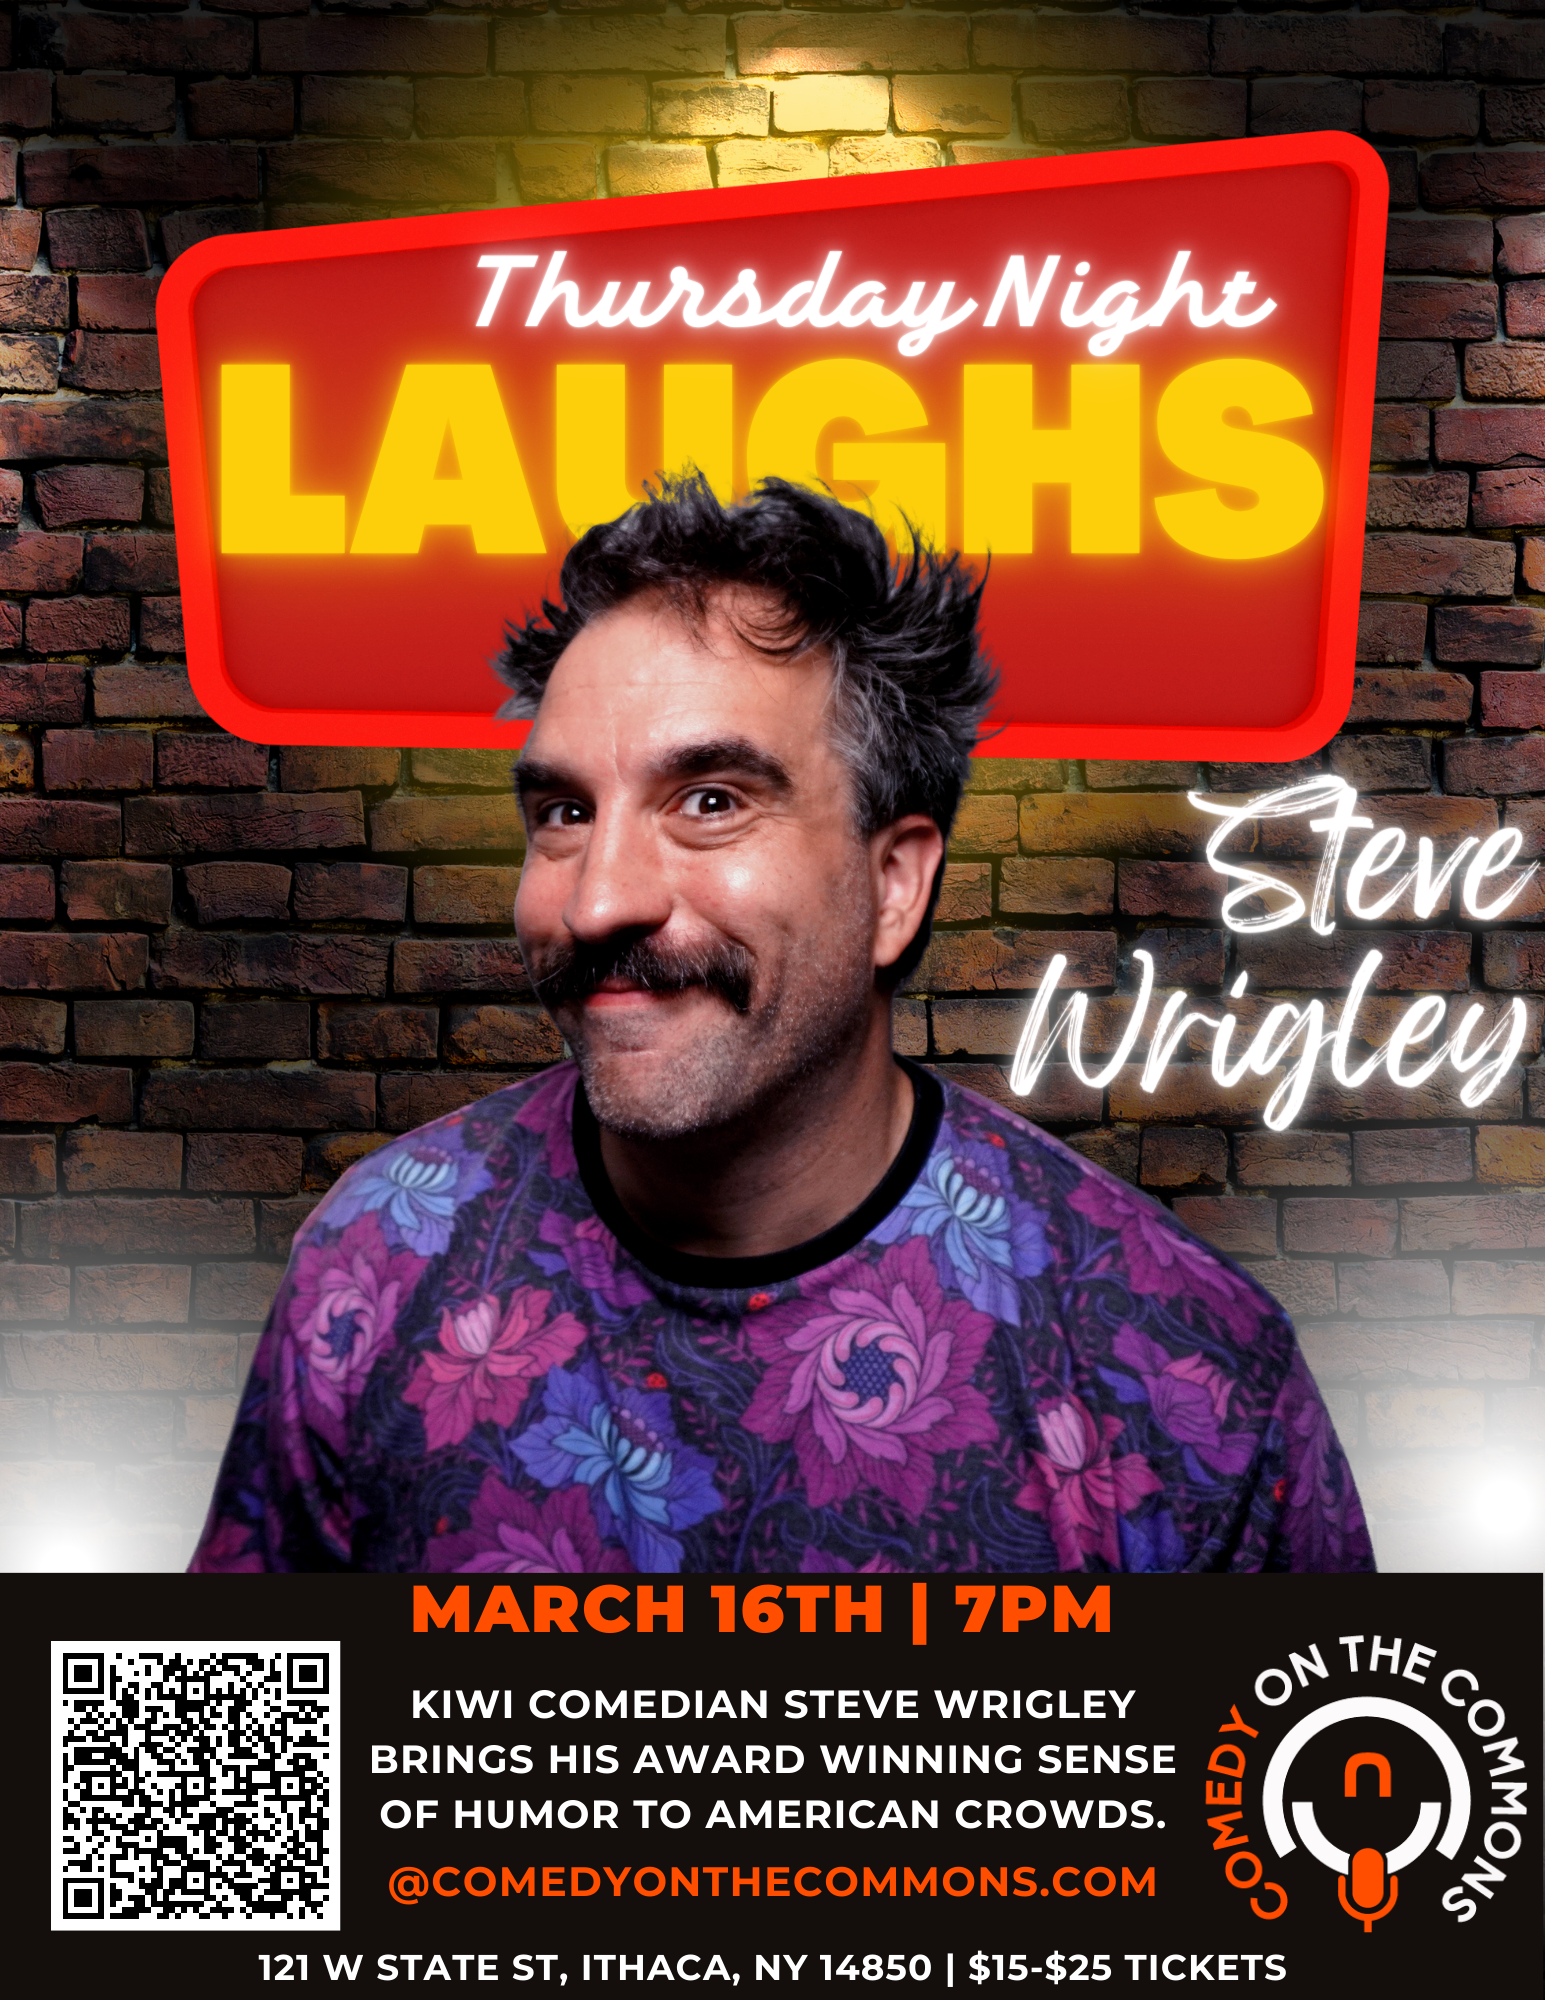 Thursday Night Laughs with Steve Wrigley